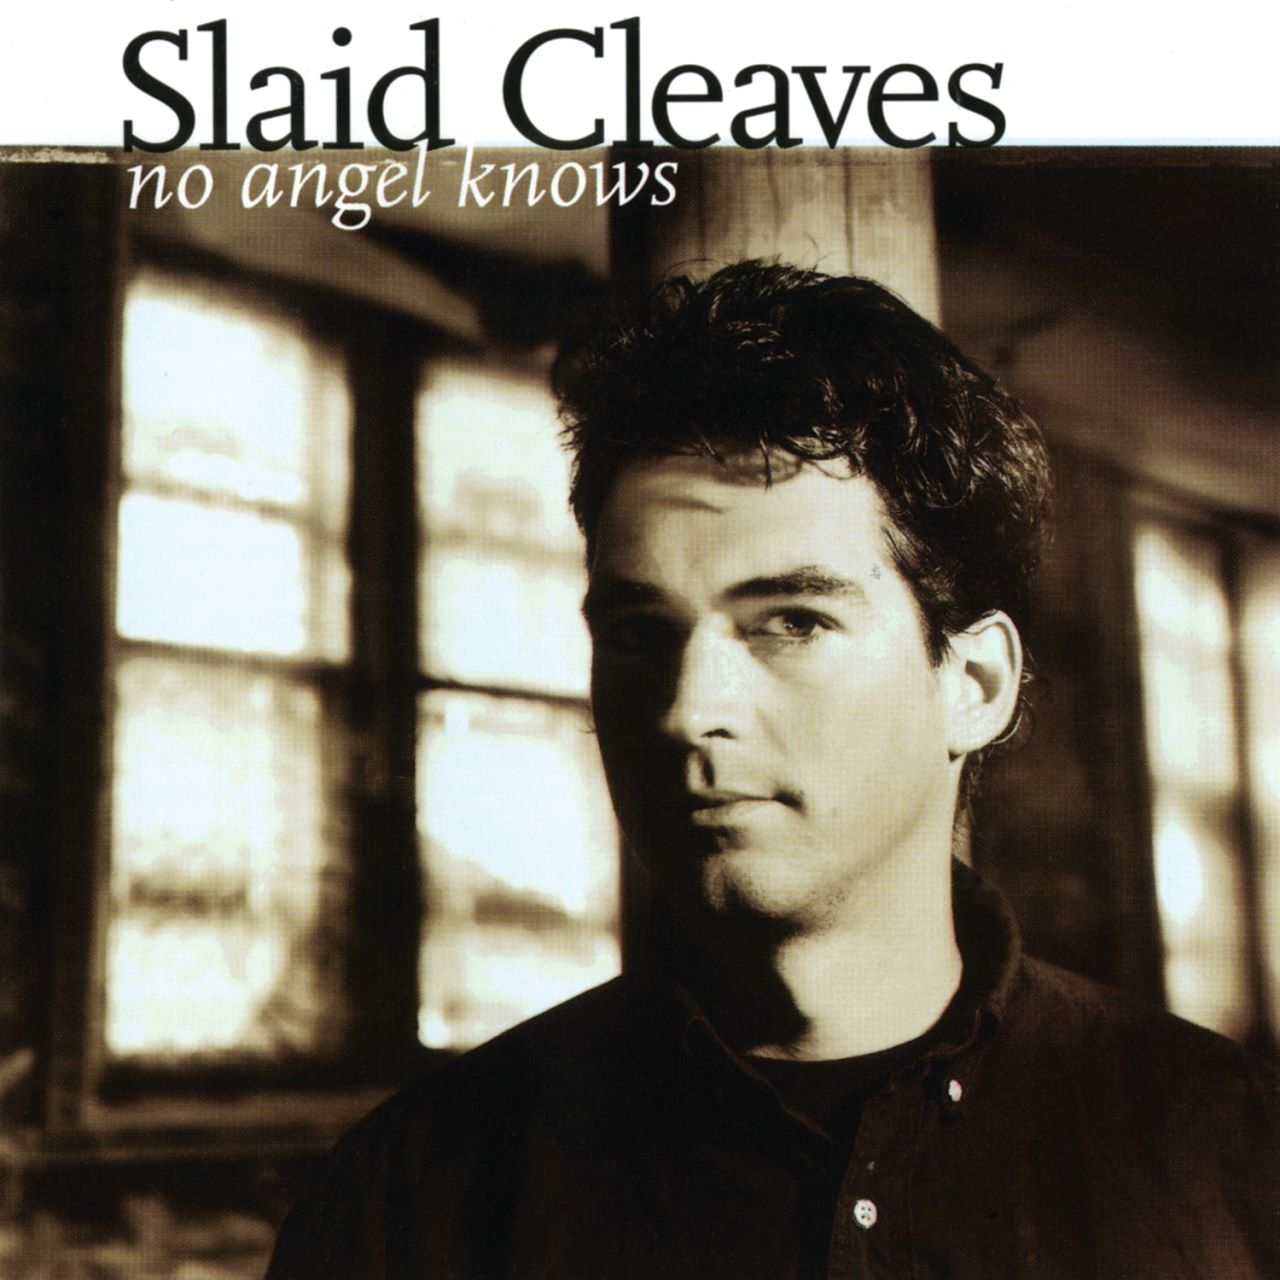 Slaid Cleaves – No Angel Knows cover album